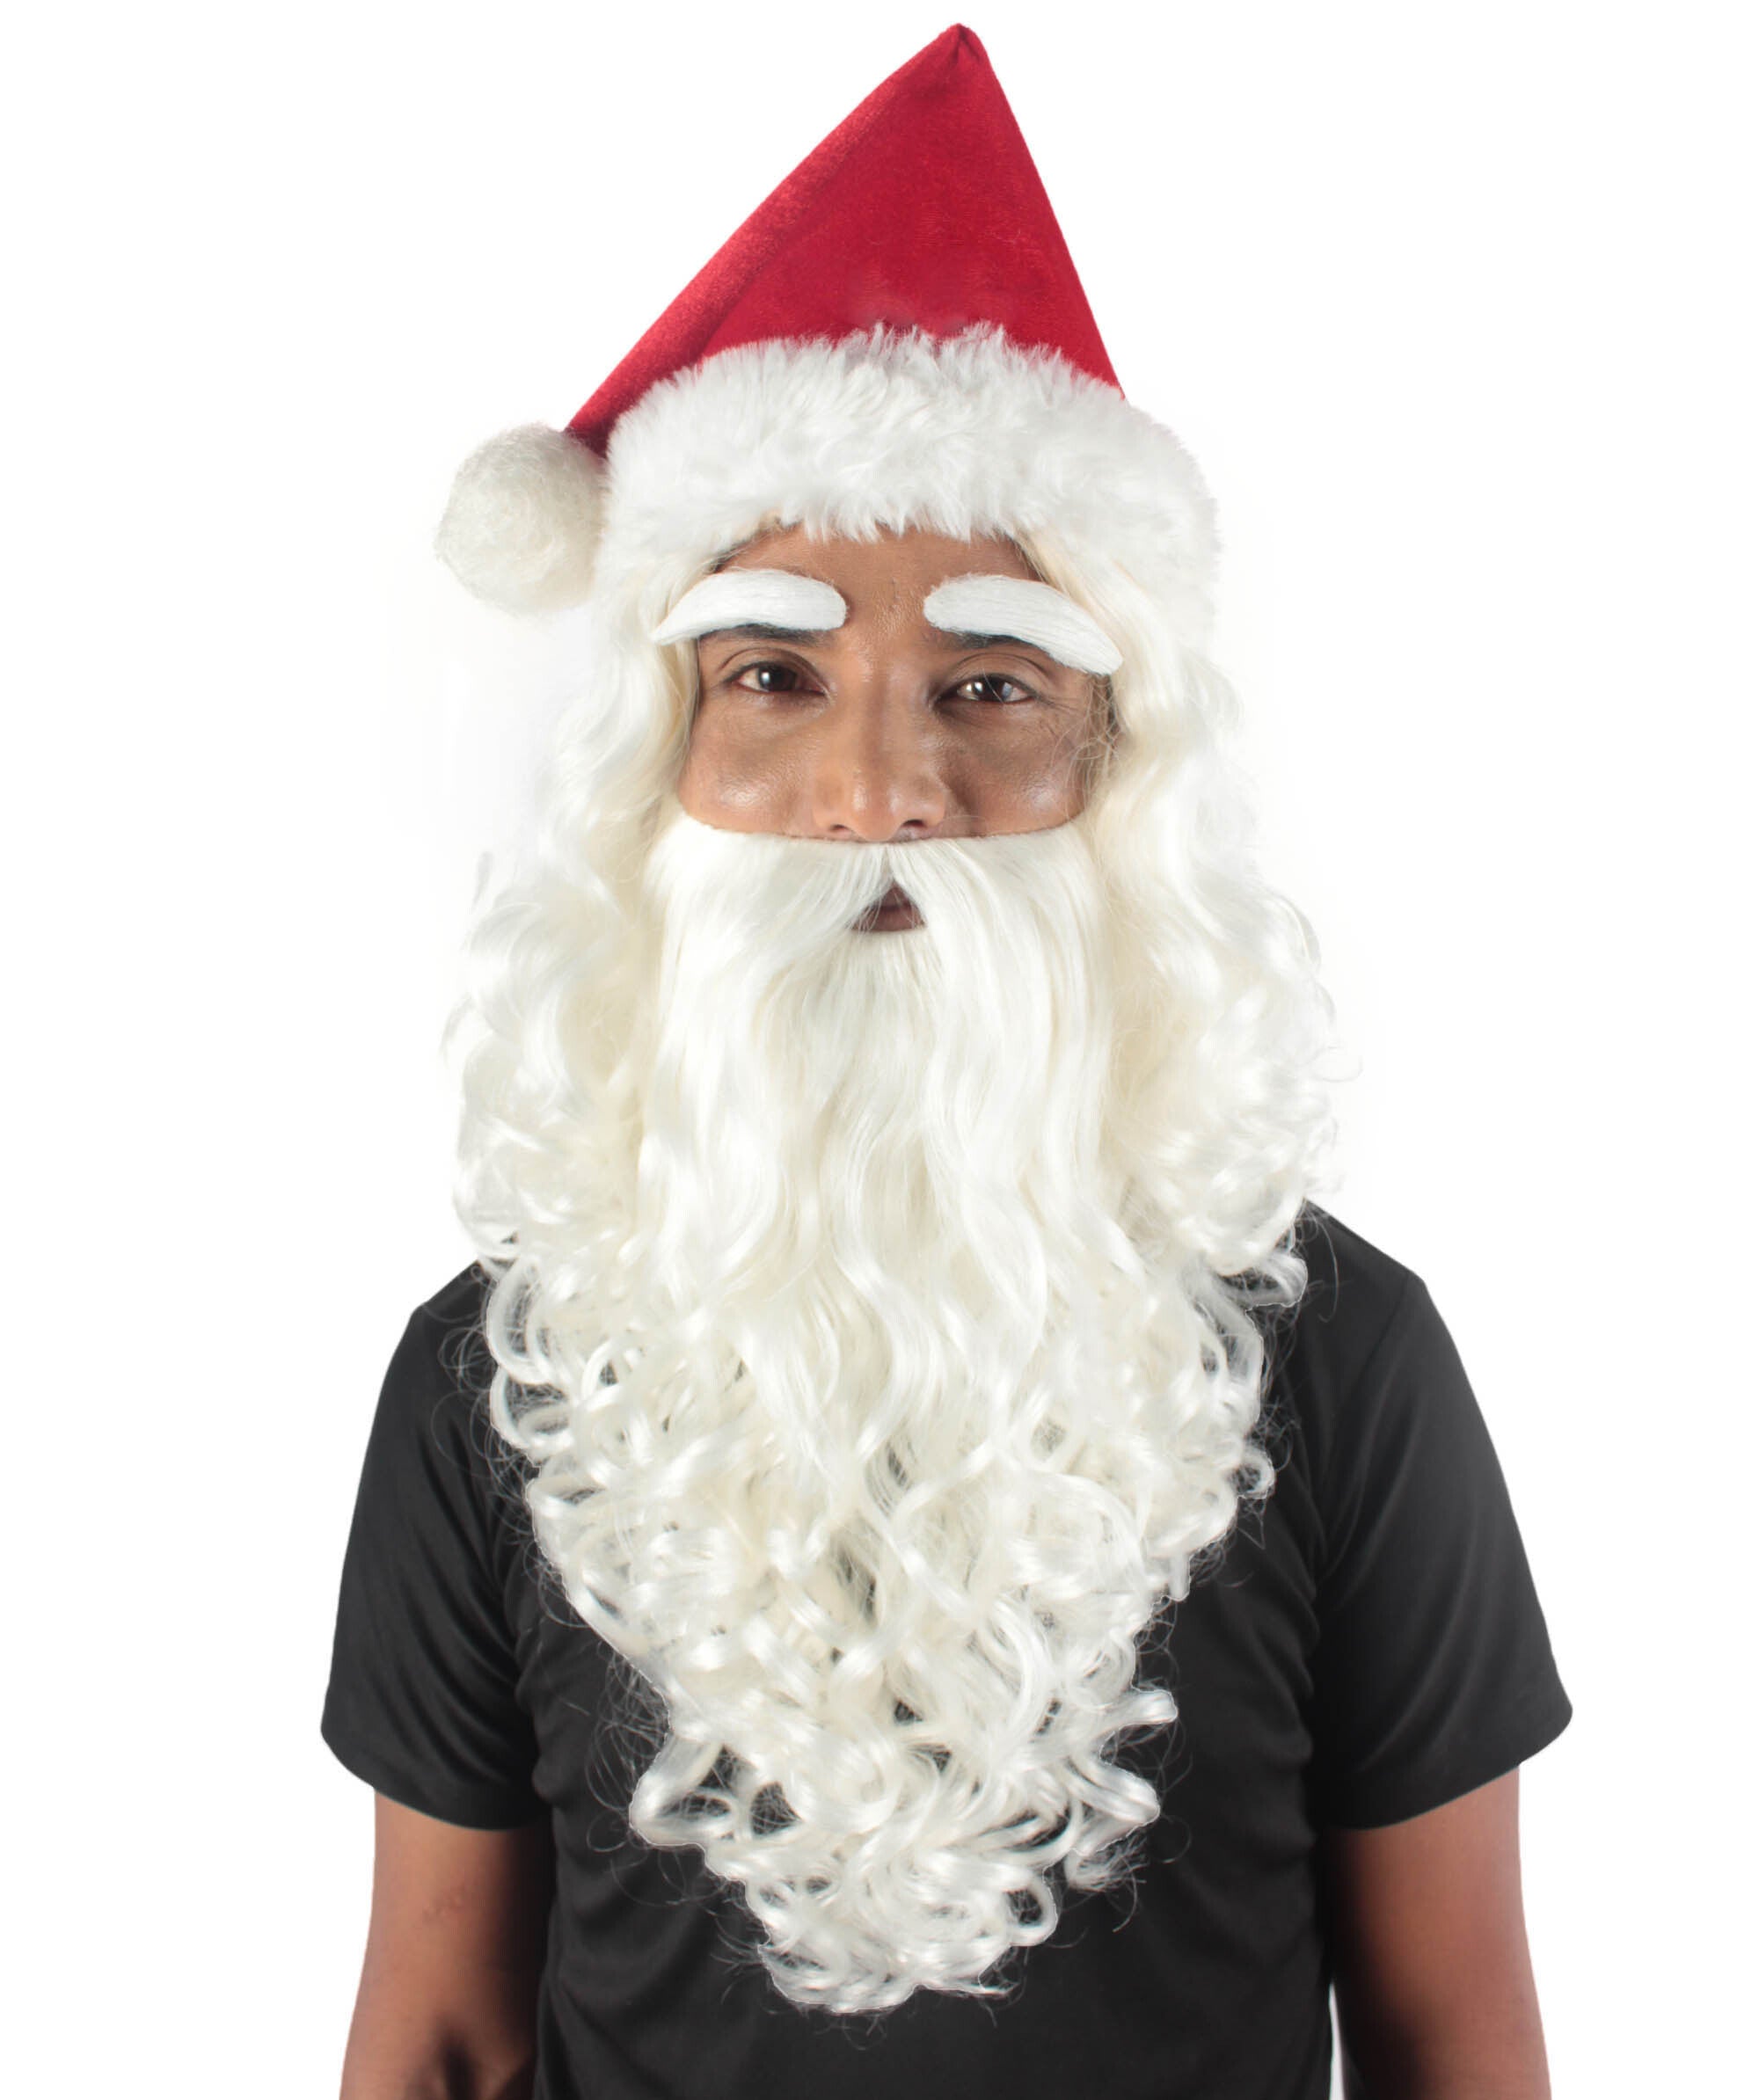 Adult Unisex Christmas Santa White Wig Beard And Red Hat Set, Long Synthetic Fibers